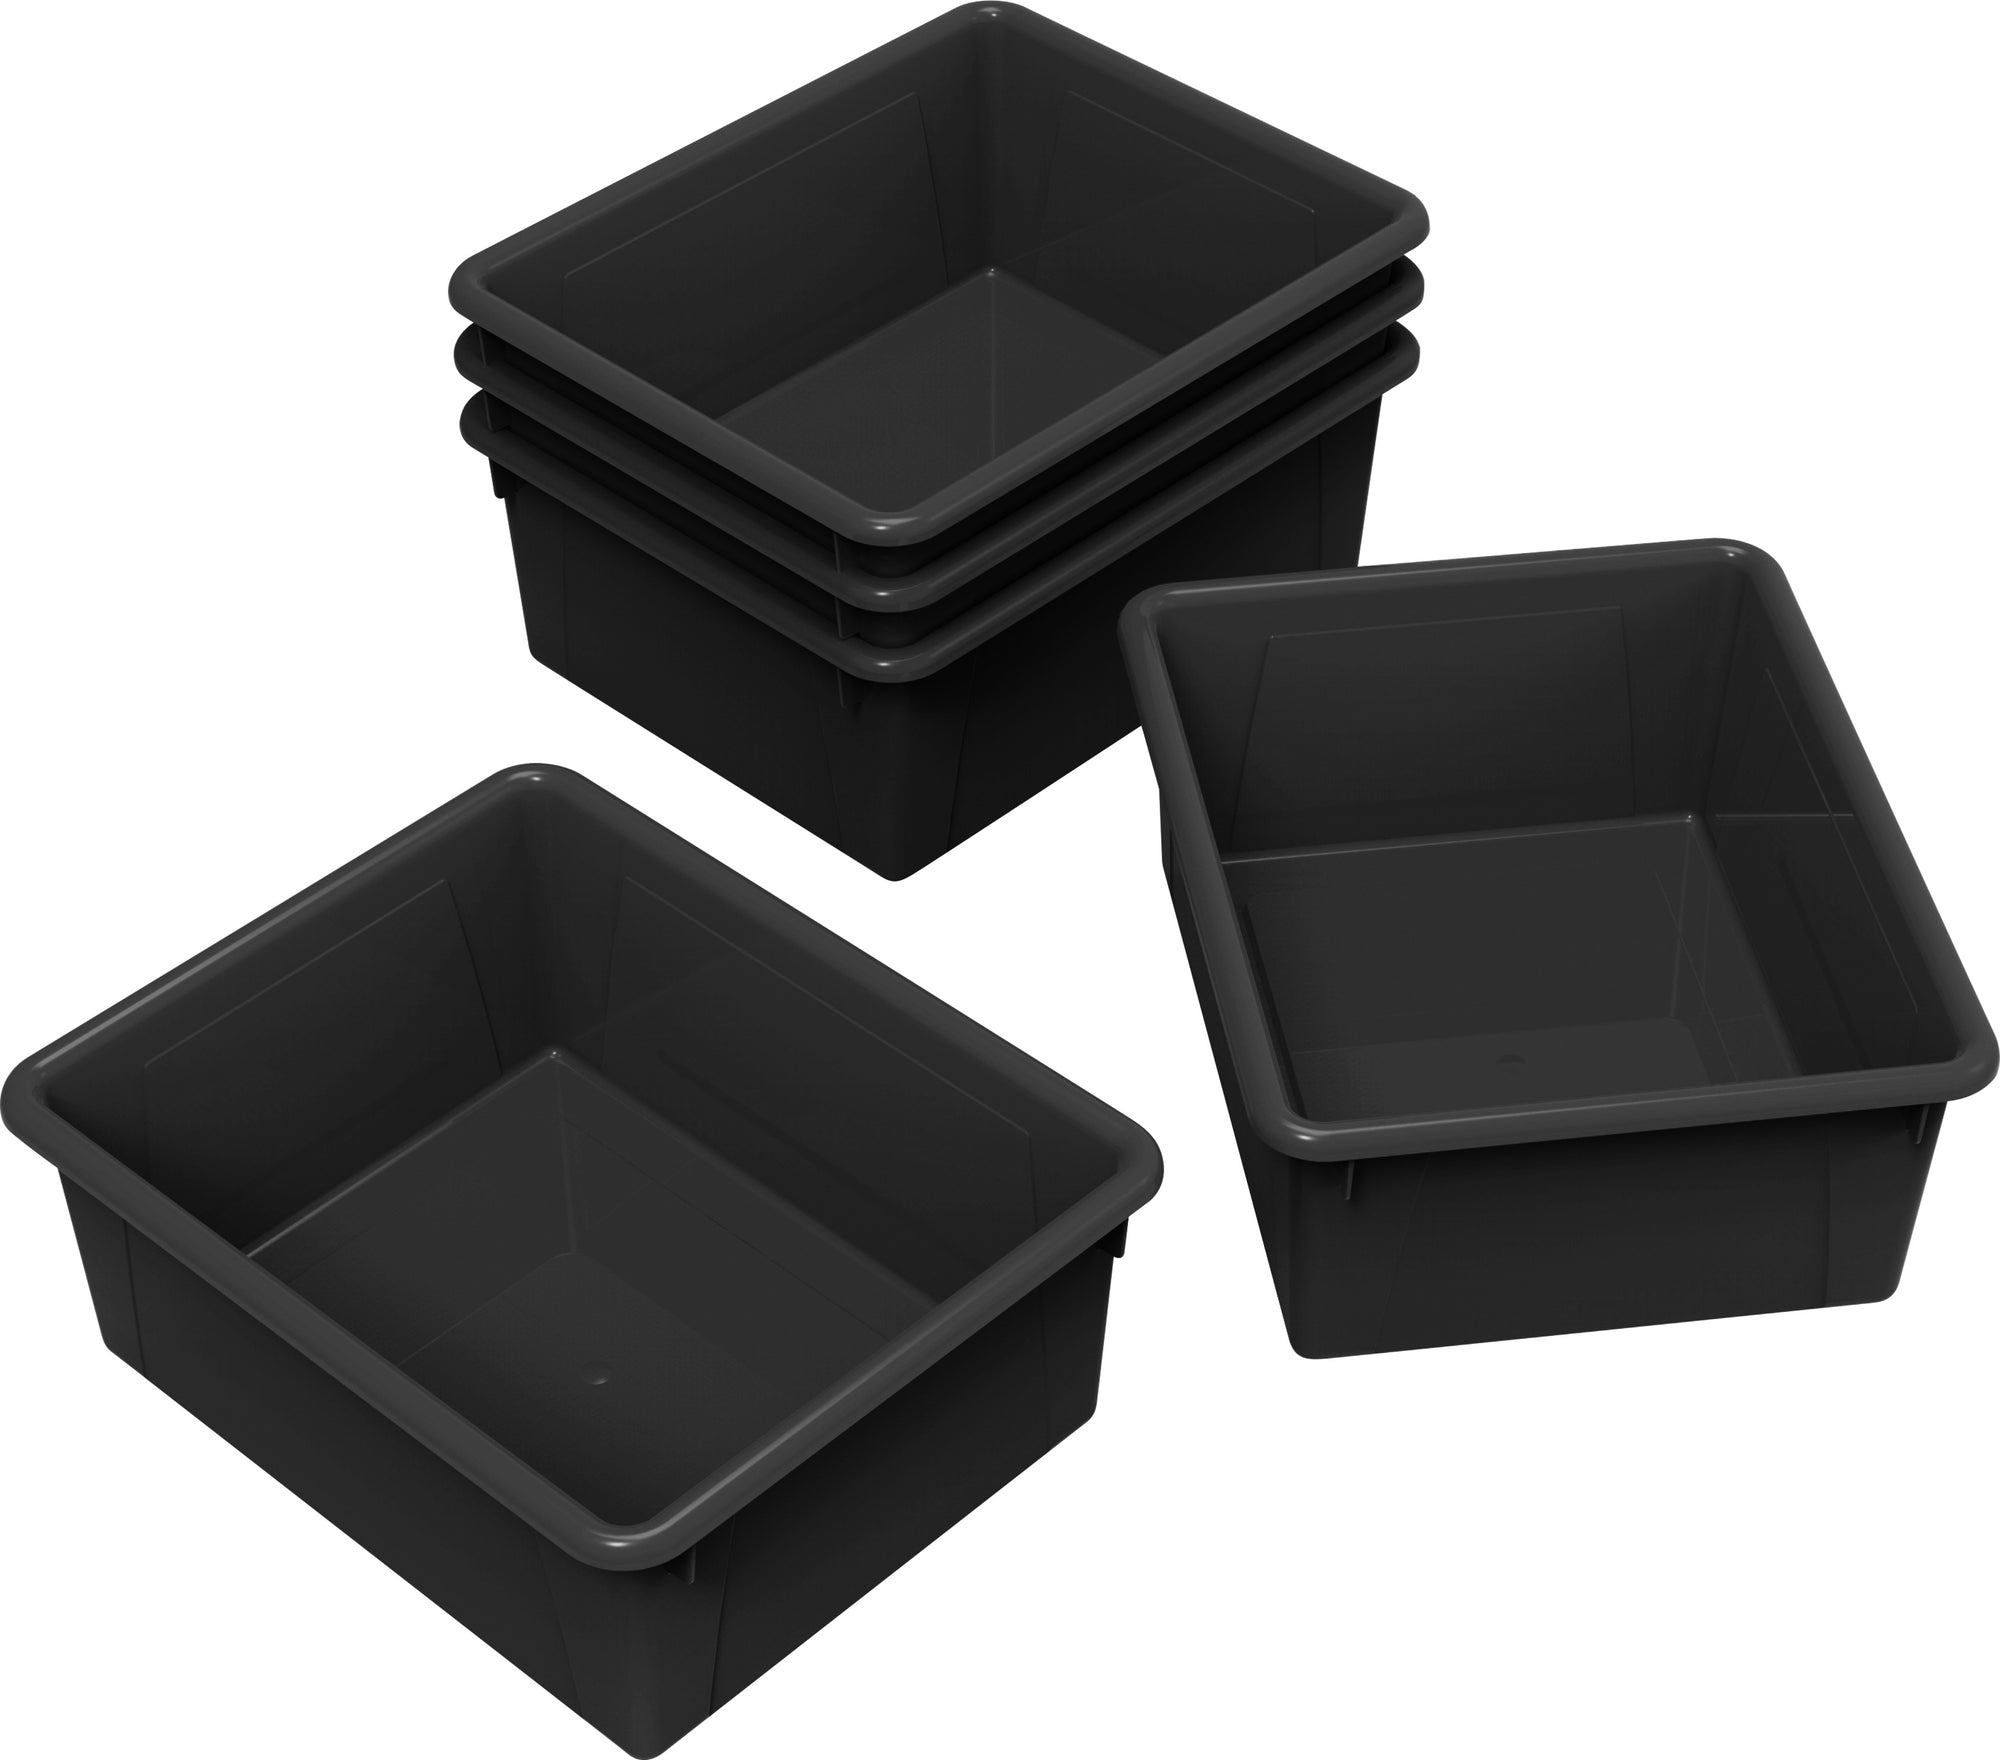 Storex Storage Tray, Letter Size, 10 x 13 x 5 Inches, Black, 5-Pack